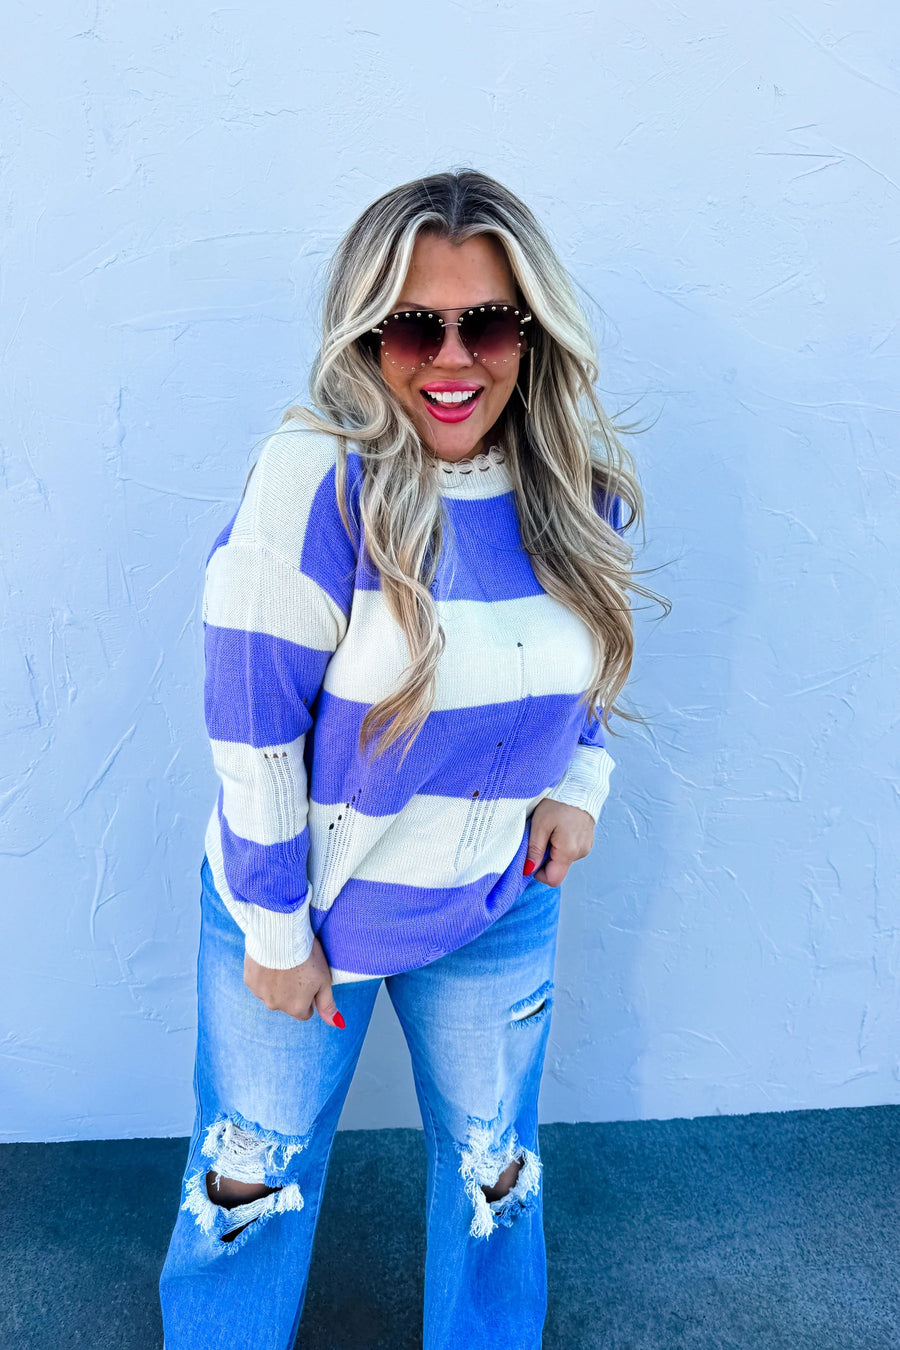 Finley Spring Striped Tops - 3 Colors!